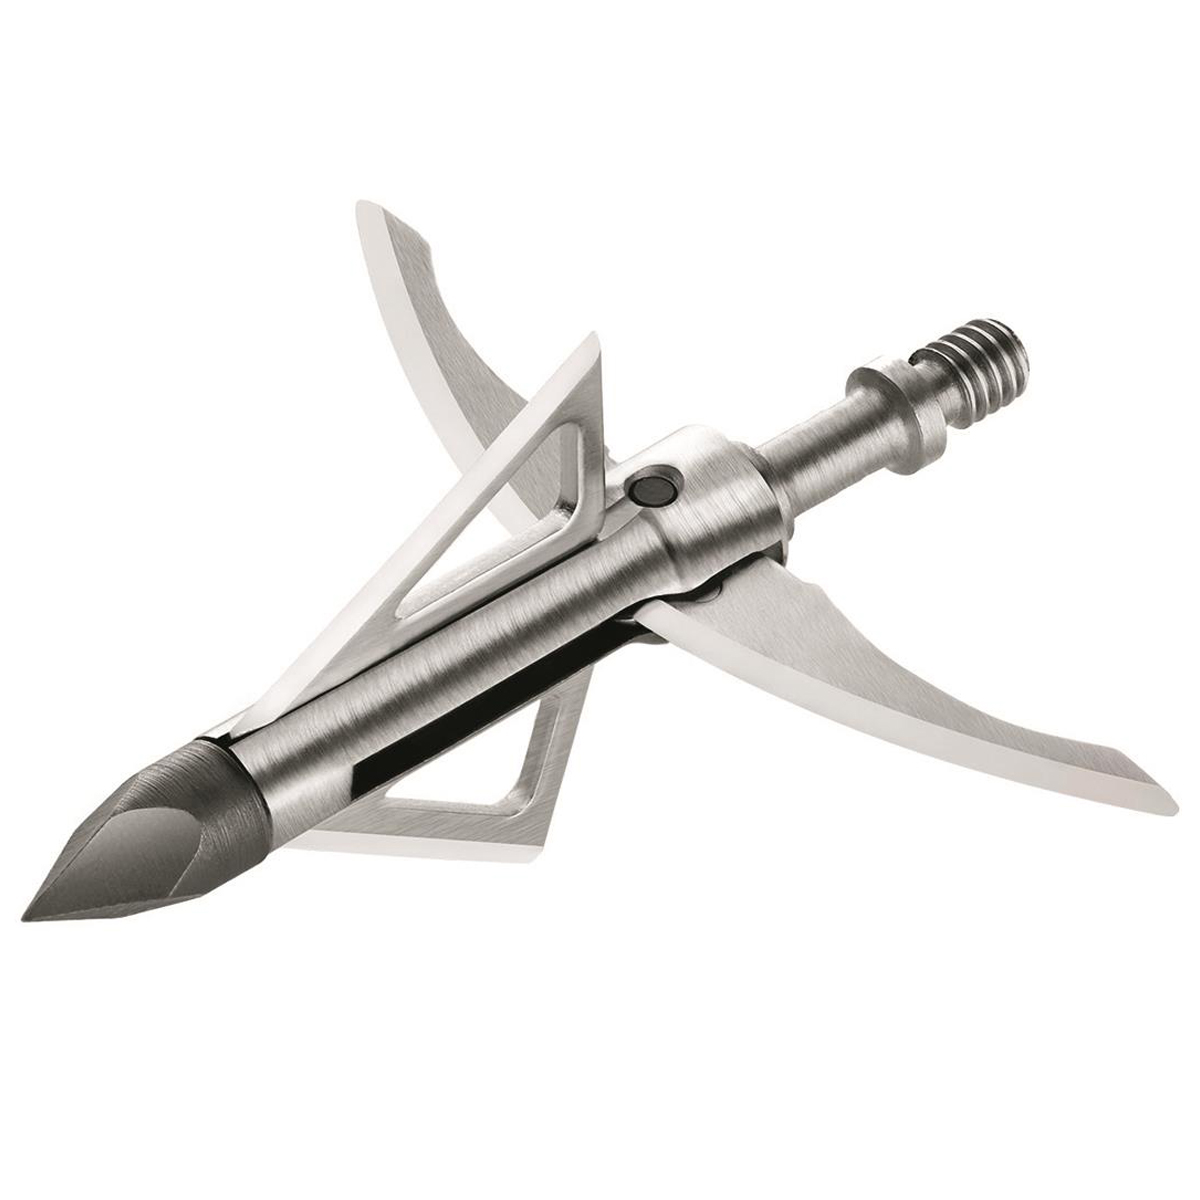 BLOODSPORT GRAVE DIGGER WITH CHISEL TIP BROADHEADS - 3 PACK Photo